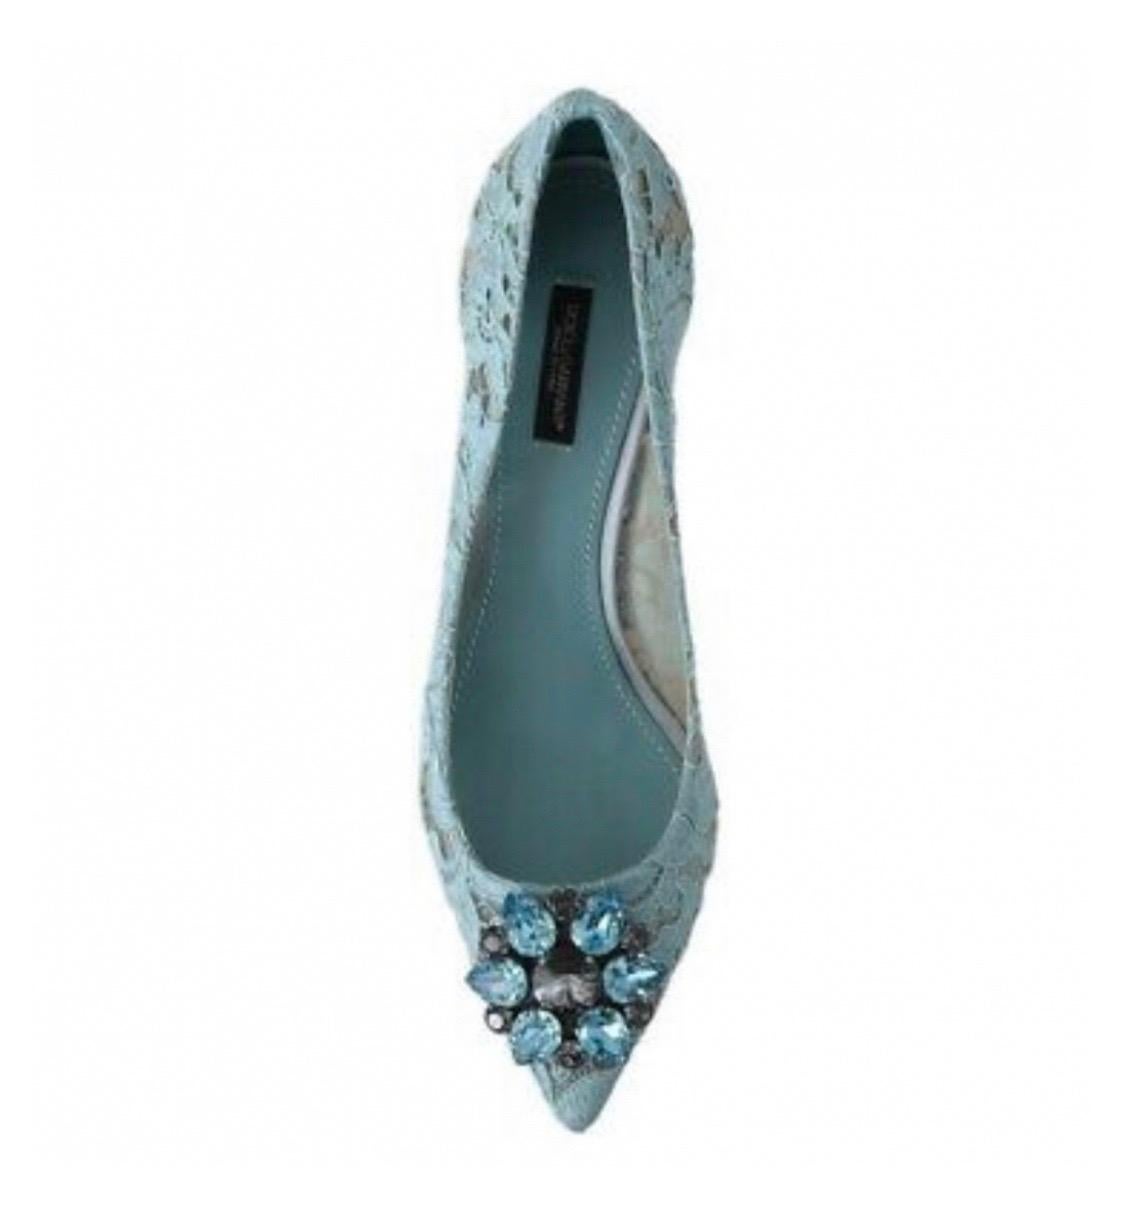 Women's Dolce & Gabbana blue  PUMP lace
shoes with jewel detail on the top heels 